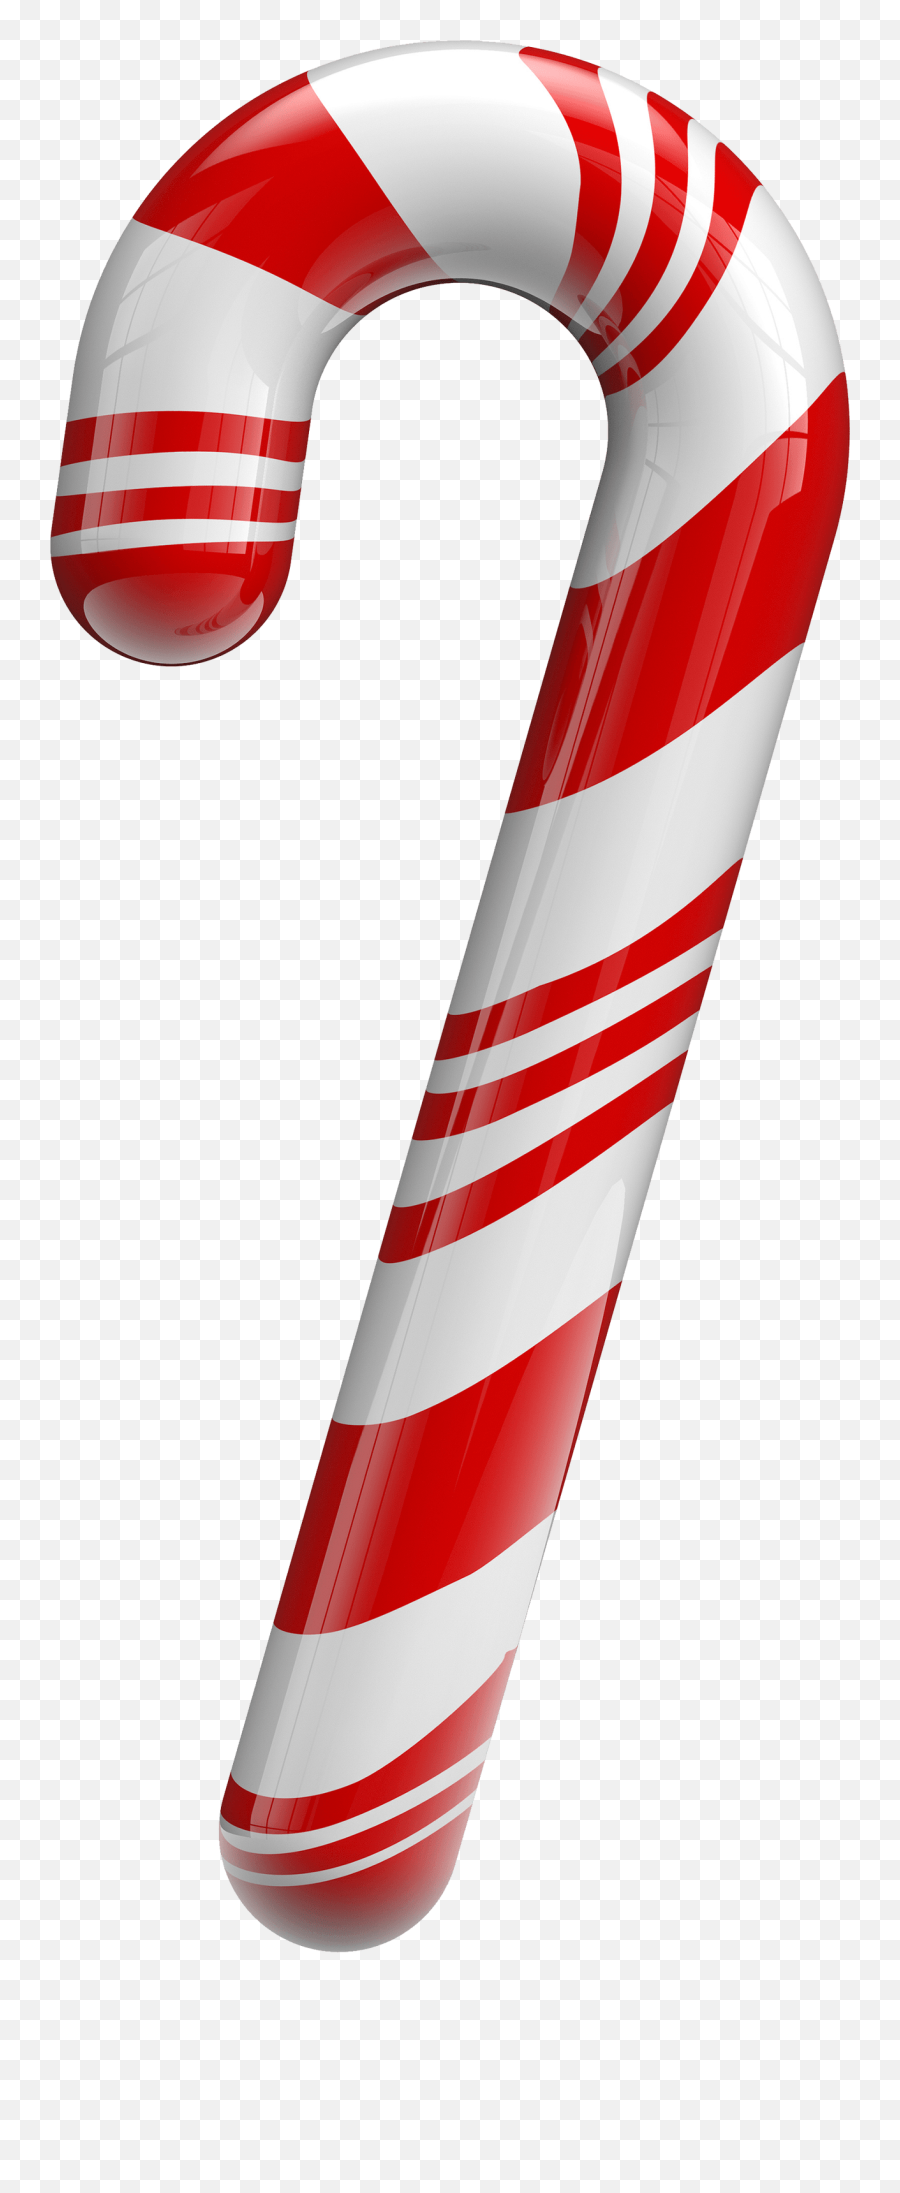 Traditional Christmas Sugar Cane Png Image - Purepng Free,Cane Png